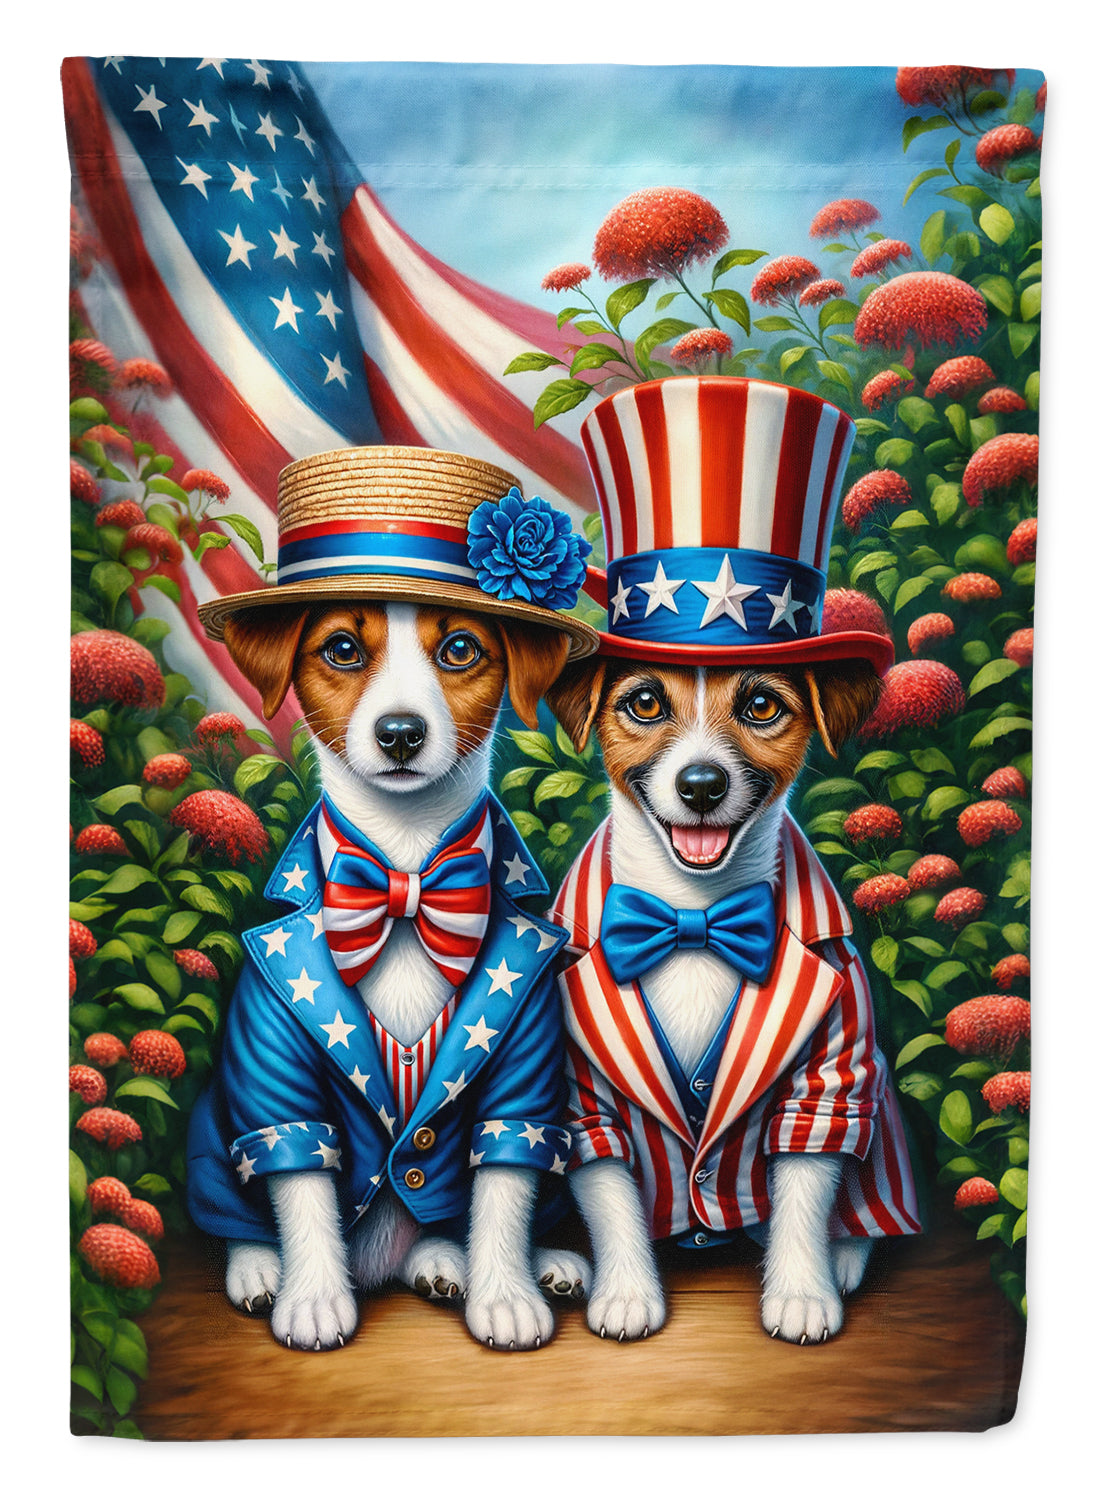 Buy this All American Jack Russell Terrier Garden Flag